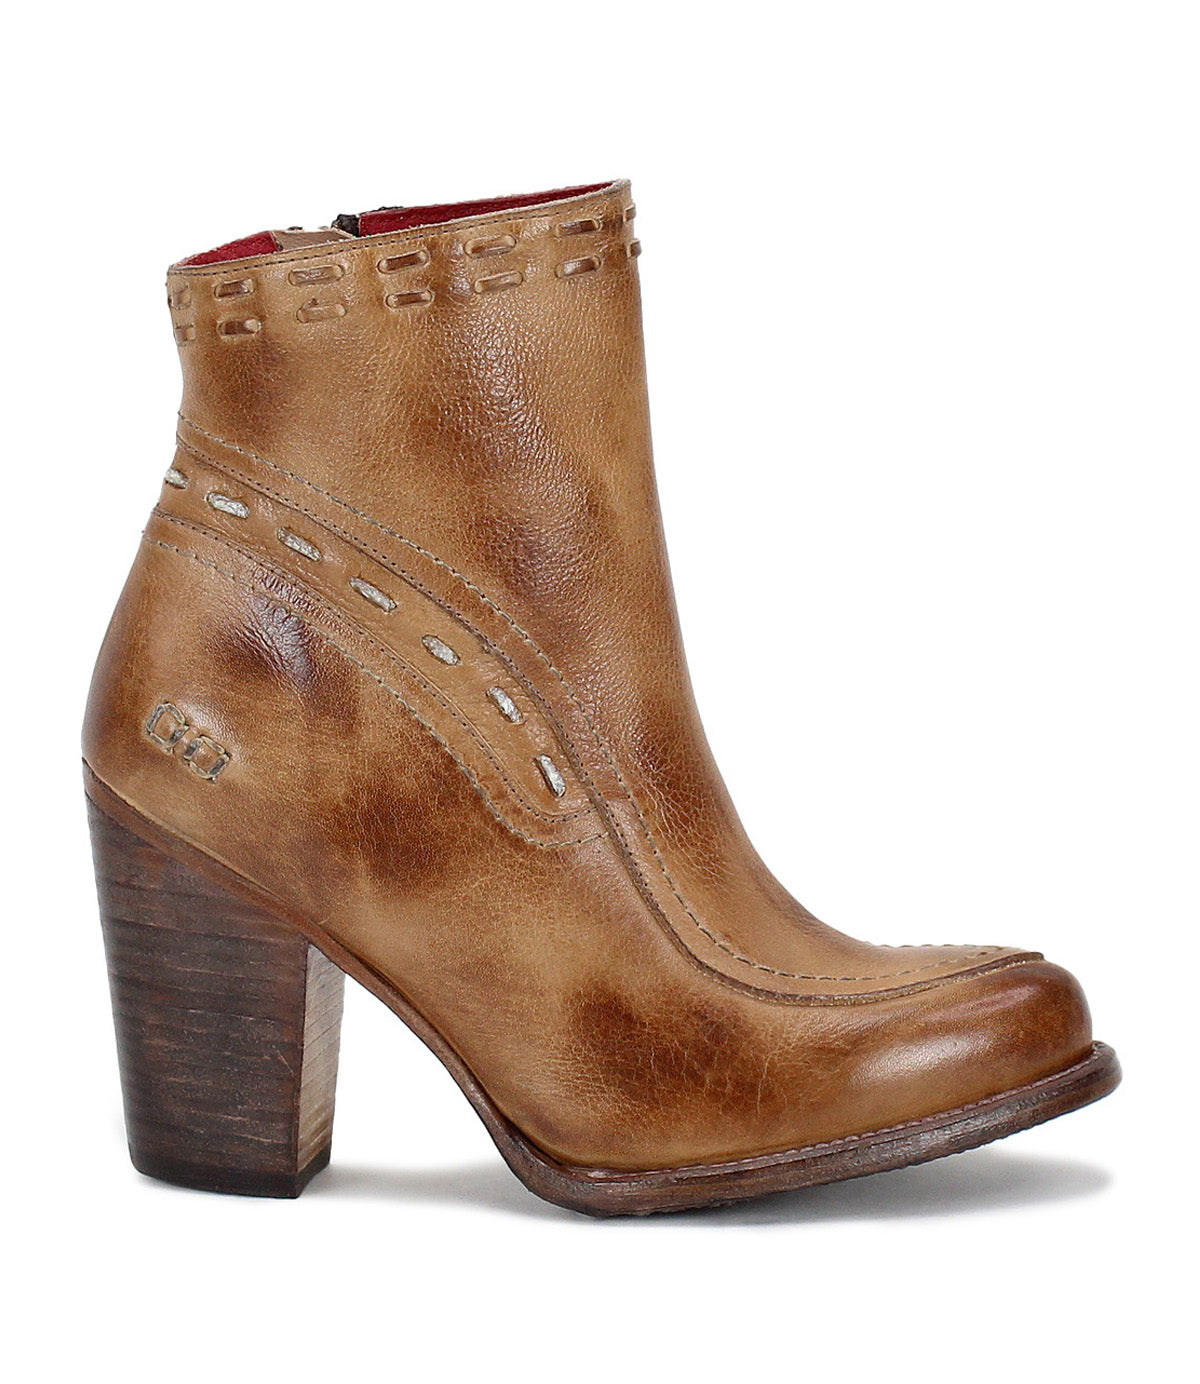 Unique women's tan ankle boot featuring a wooden heel, inspired by the Bed Stu Yuno style.